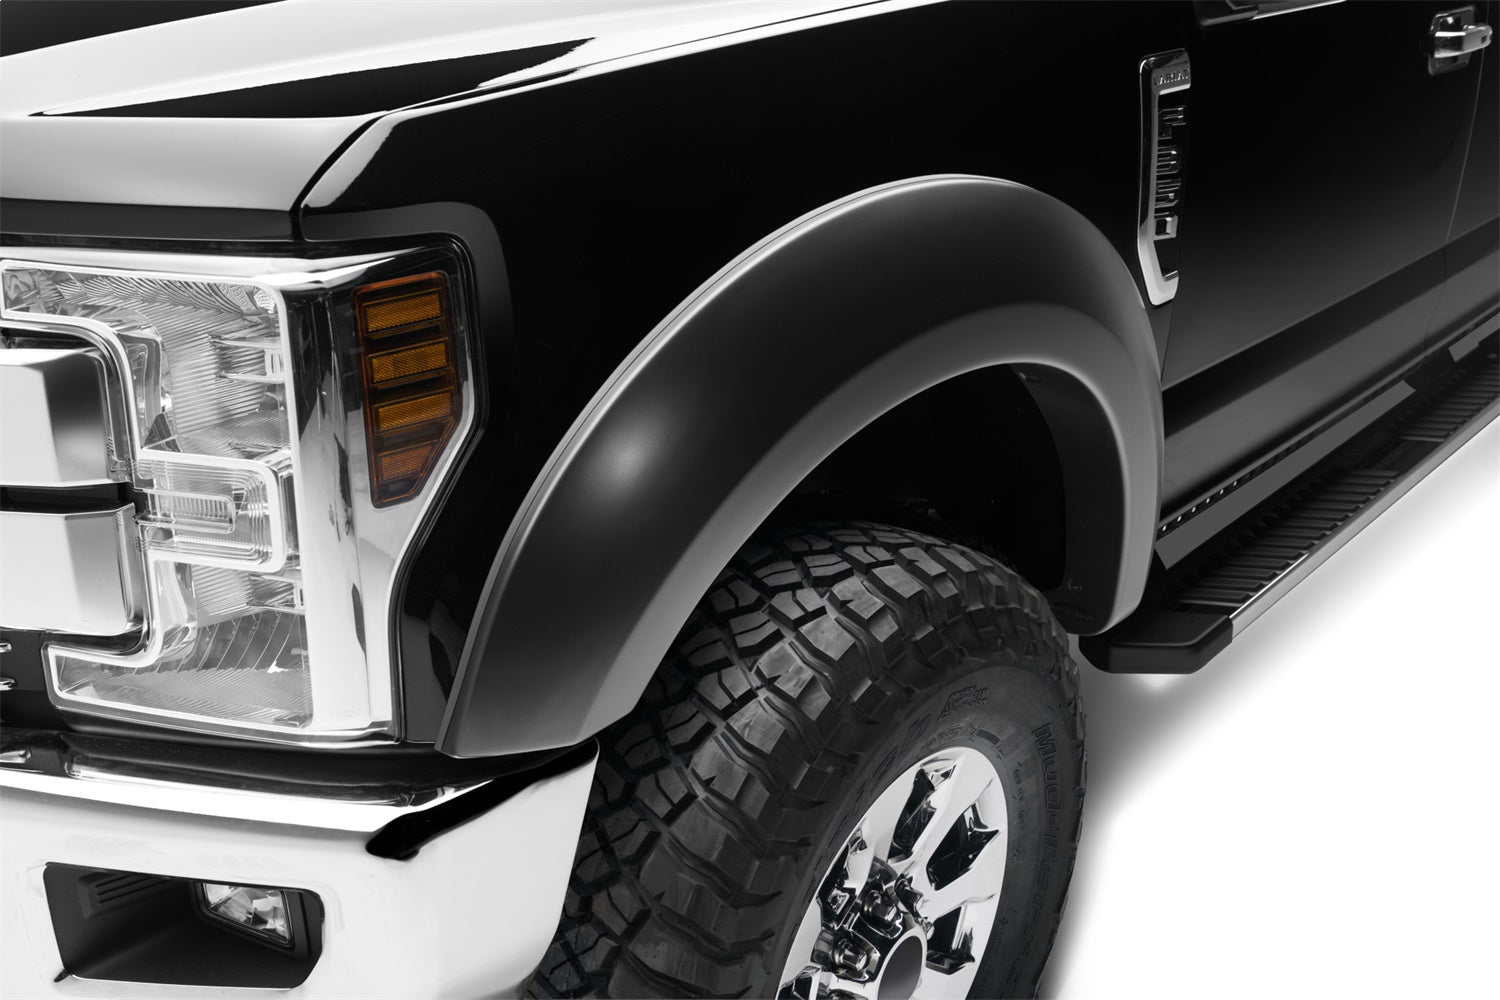 Bushwacker 20087-02 Black Extend-A-Fender Style Smooth Finish Front Fender Flares for 2017-2021 Ford F-250, F-350, F-450 Super Duty